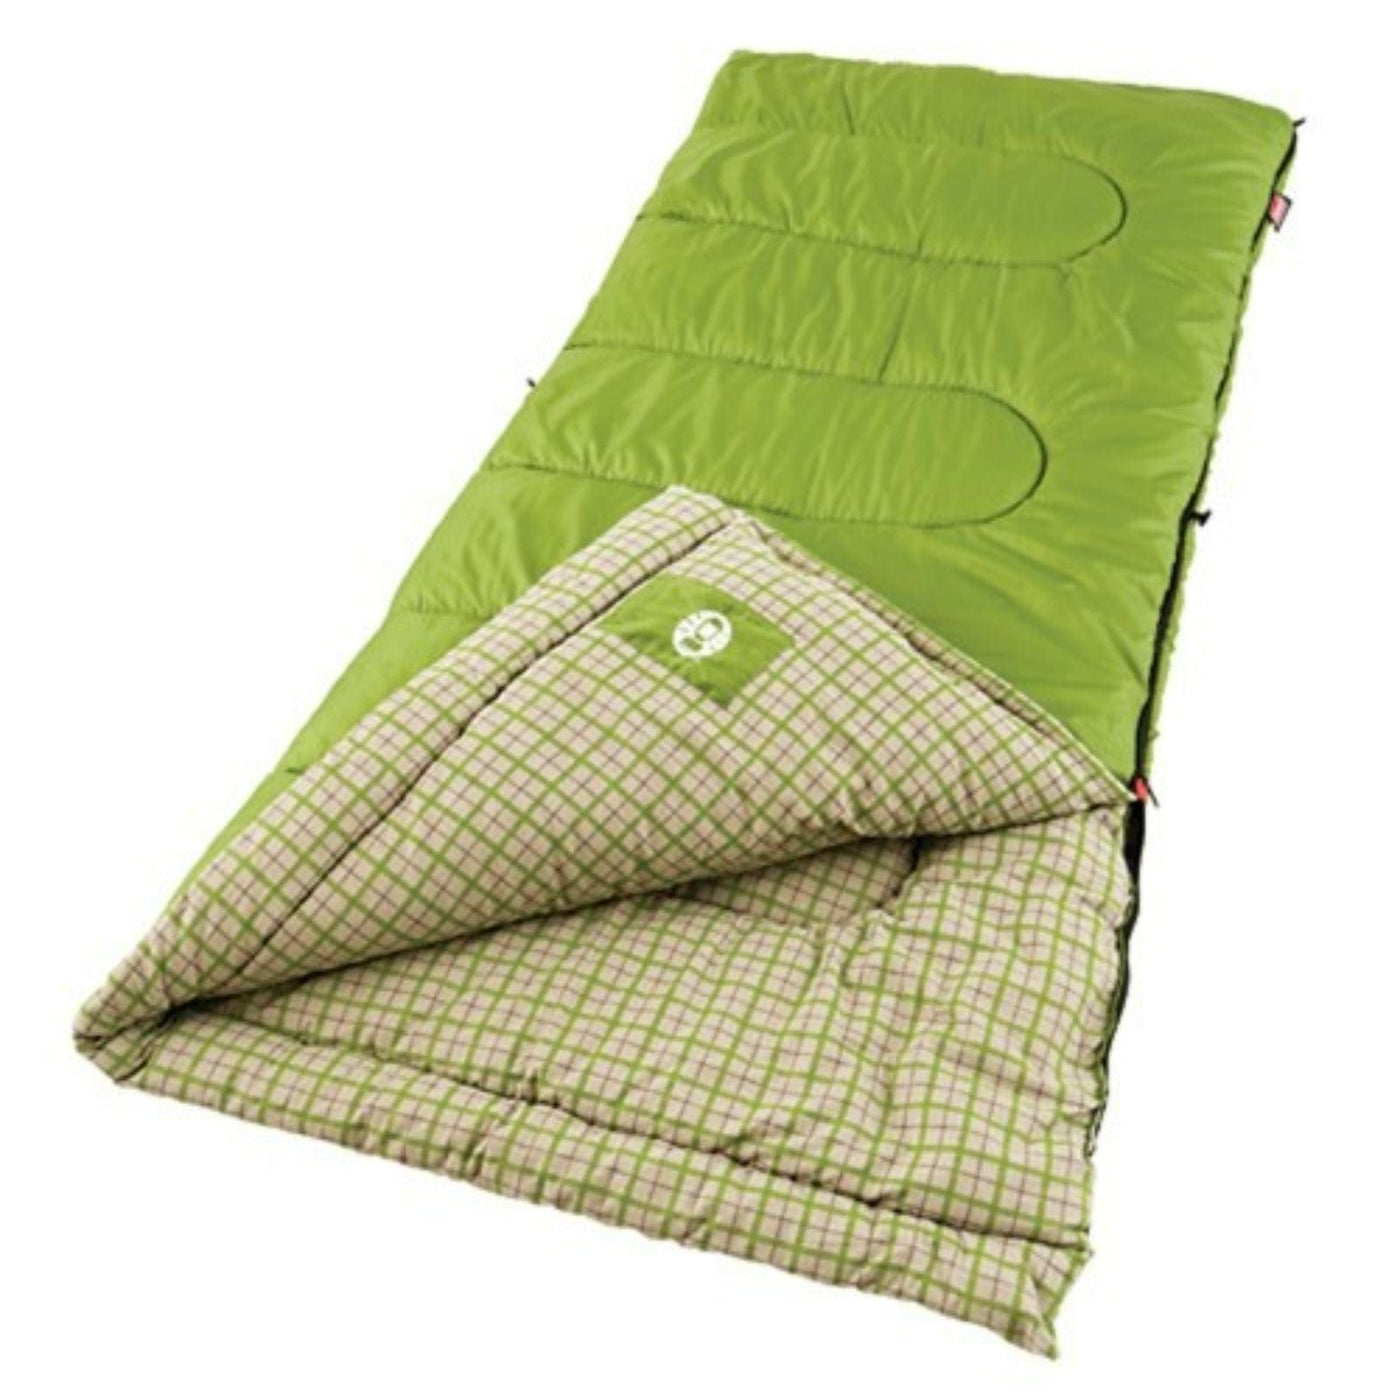 Coleman Coleman Green Valley 75x33 Inch Rectangle Sleeping Bag Green Camping And Outdoor